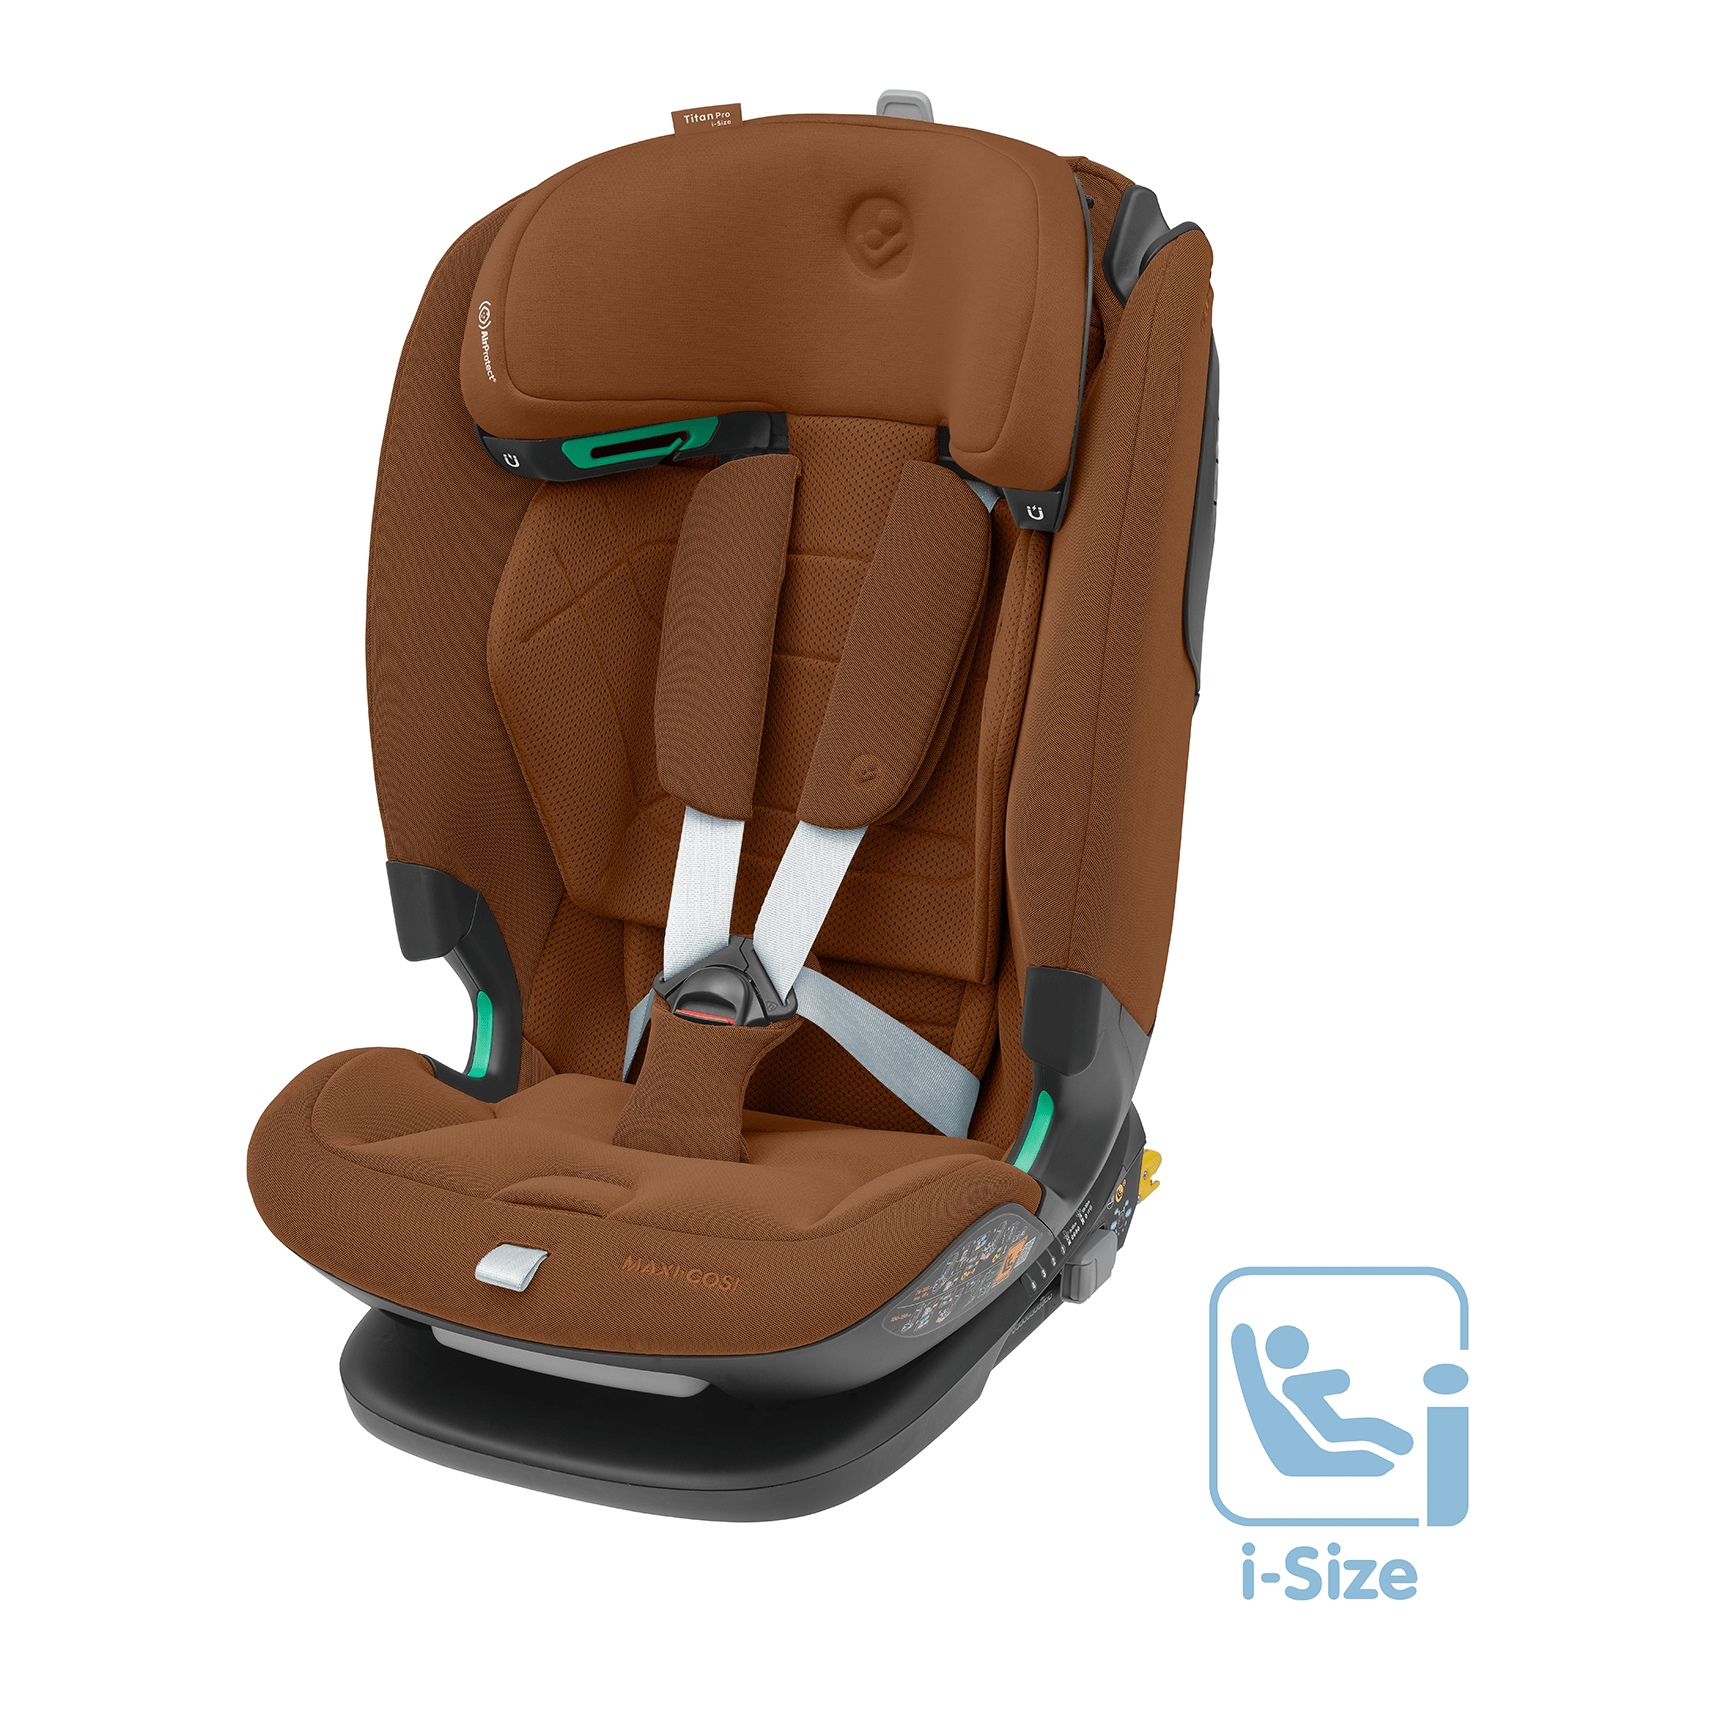 Maxi Cosi Mica Pro Eco i-Size Car Seat Authentic Cognac From W H Watts